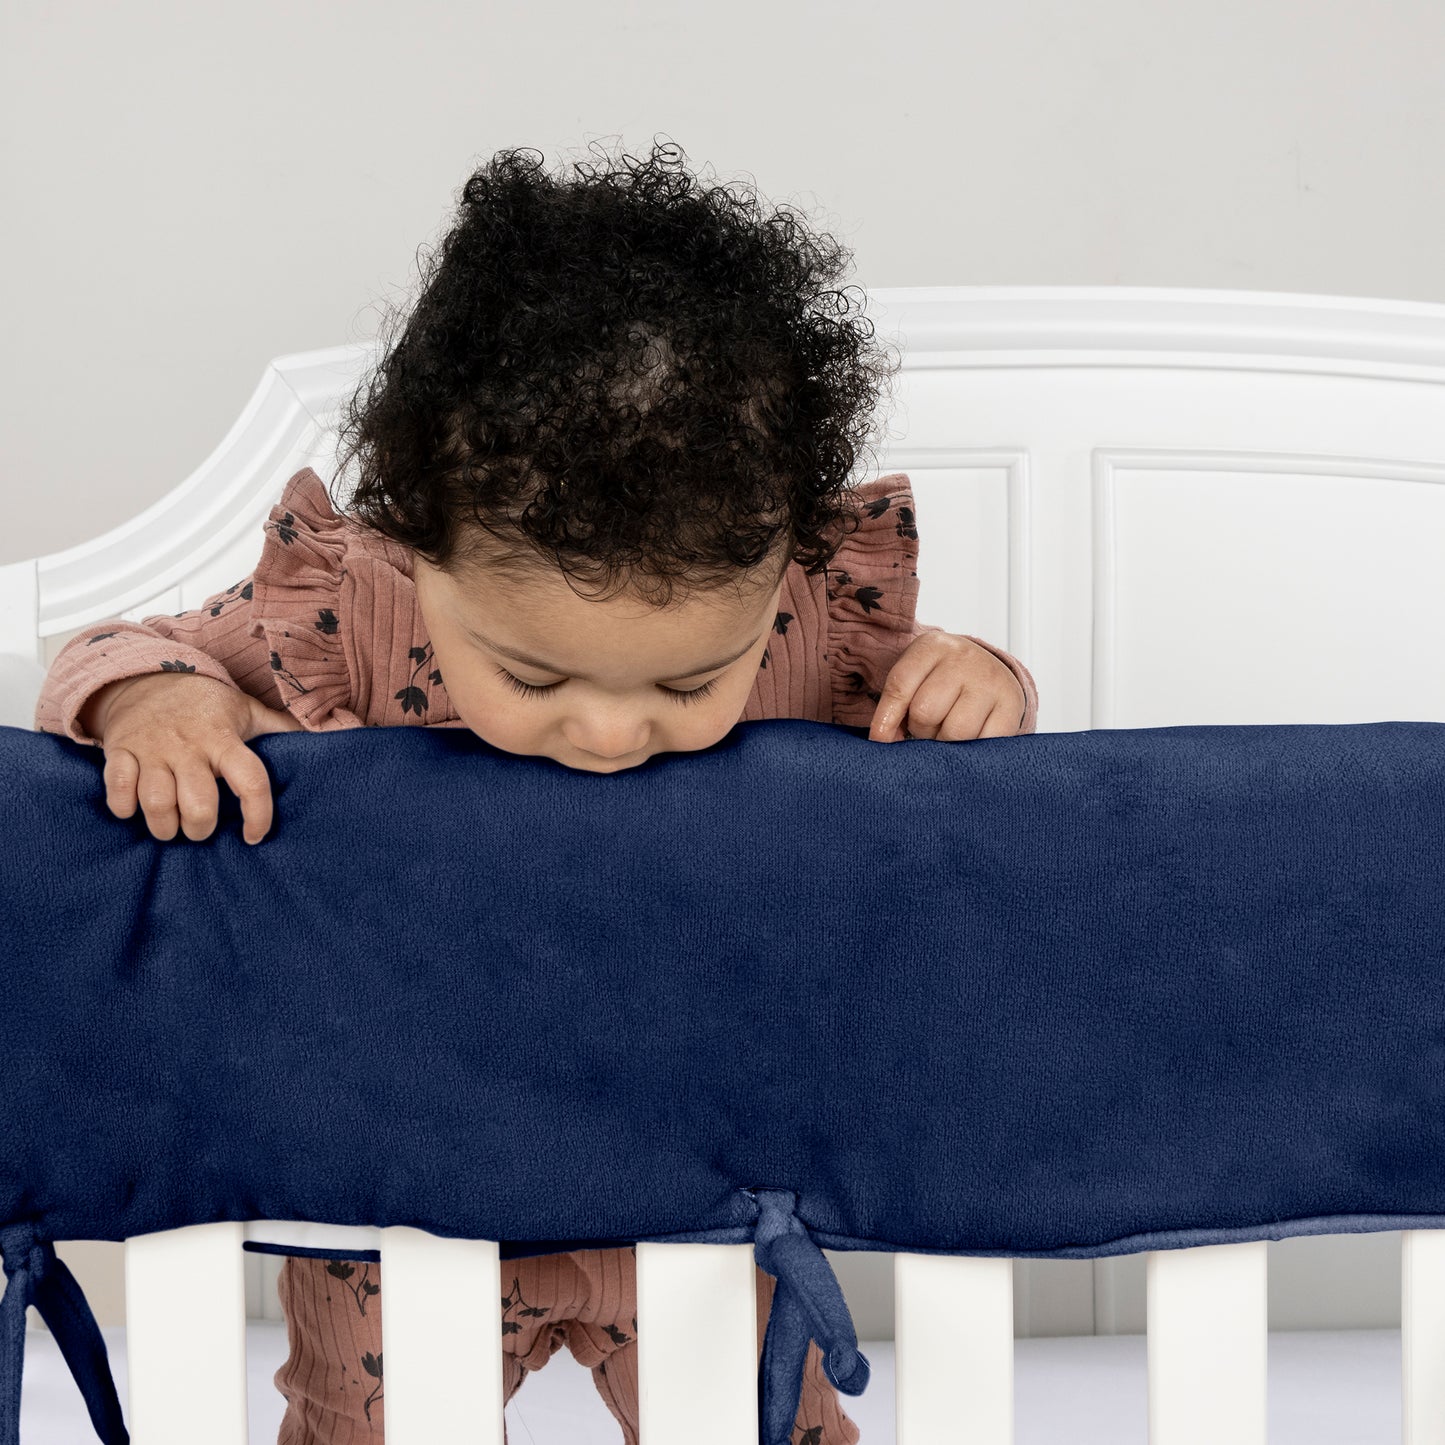 CribWrap® Wide 2 Short Navy Fleece Rail Covers; the perfect solution for protecting your crib and teething baby. With super soft navy sherpa fleece on the top, a light padding in the middle and waterproof backing, you no longer have to worry about your b